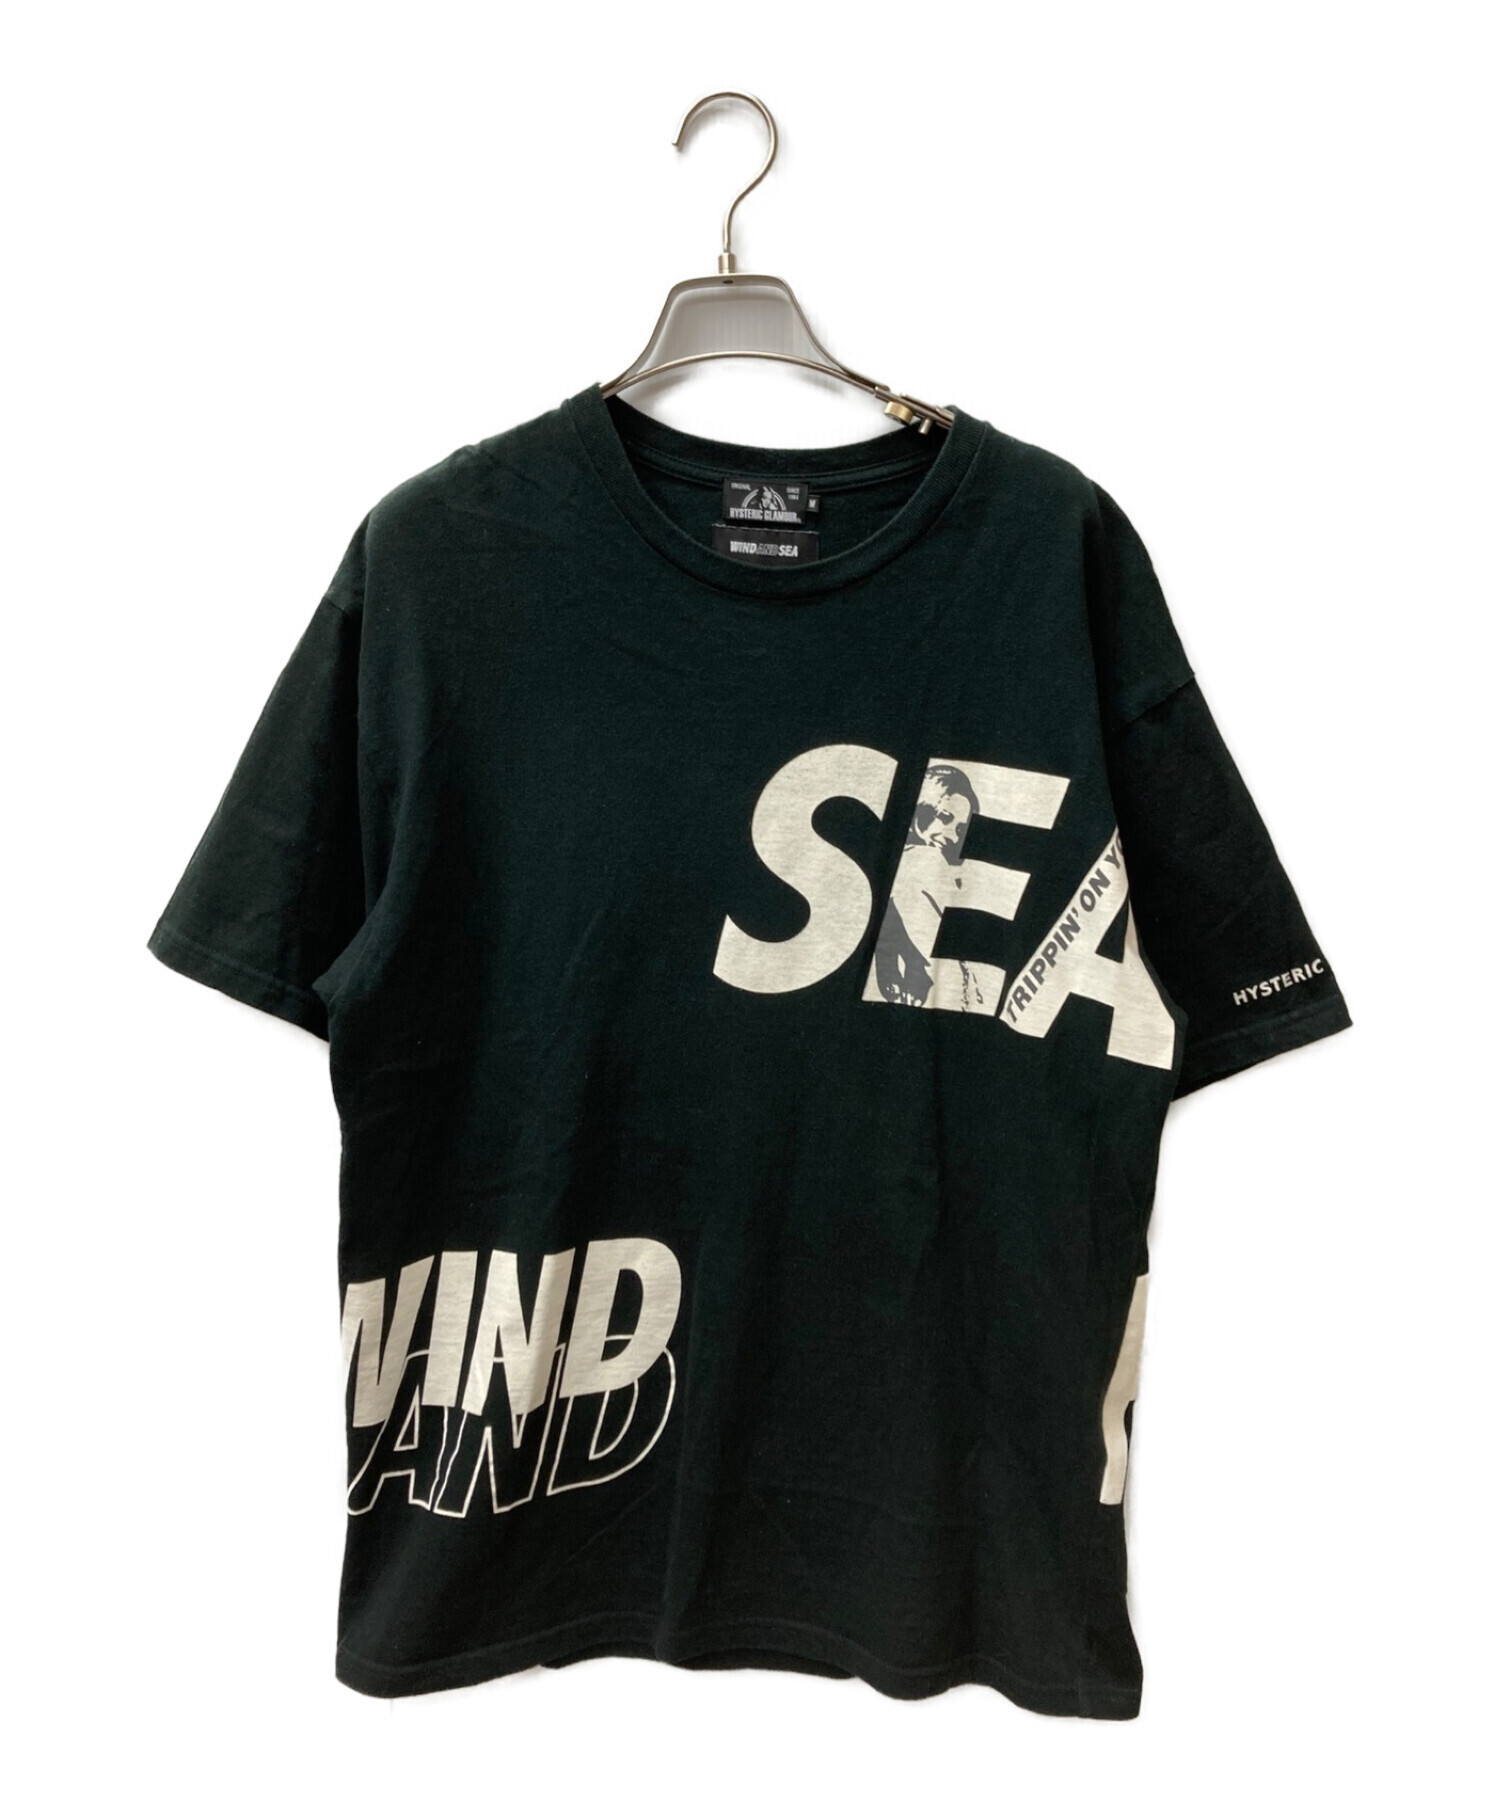 HYSTERIC GLAMOUR X wind and sea Tee